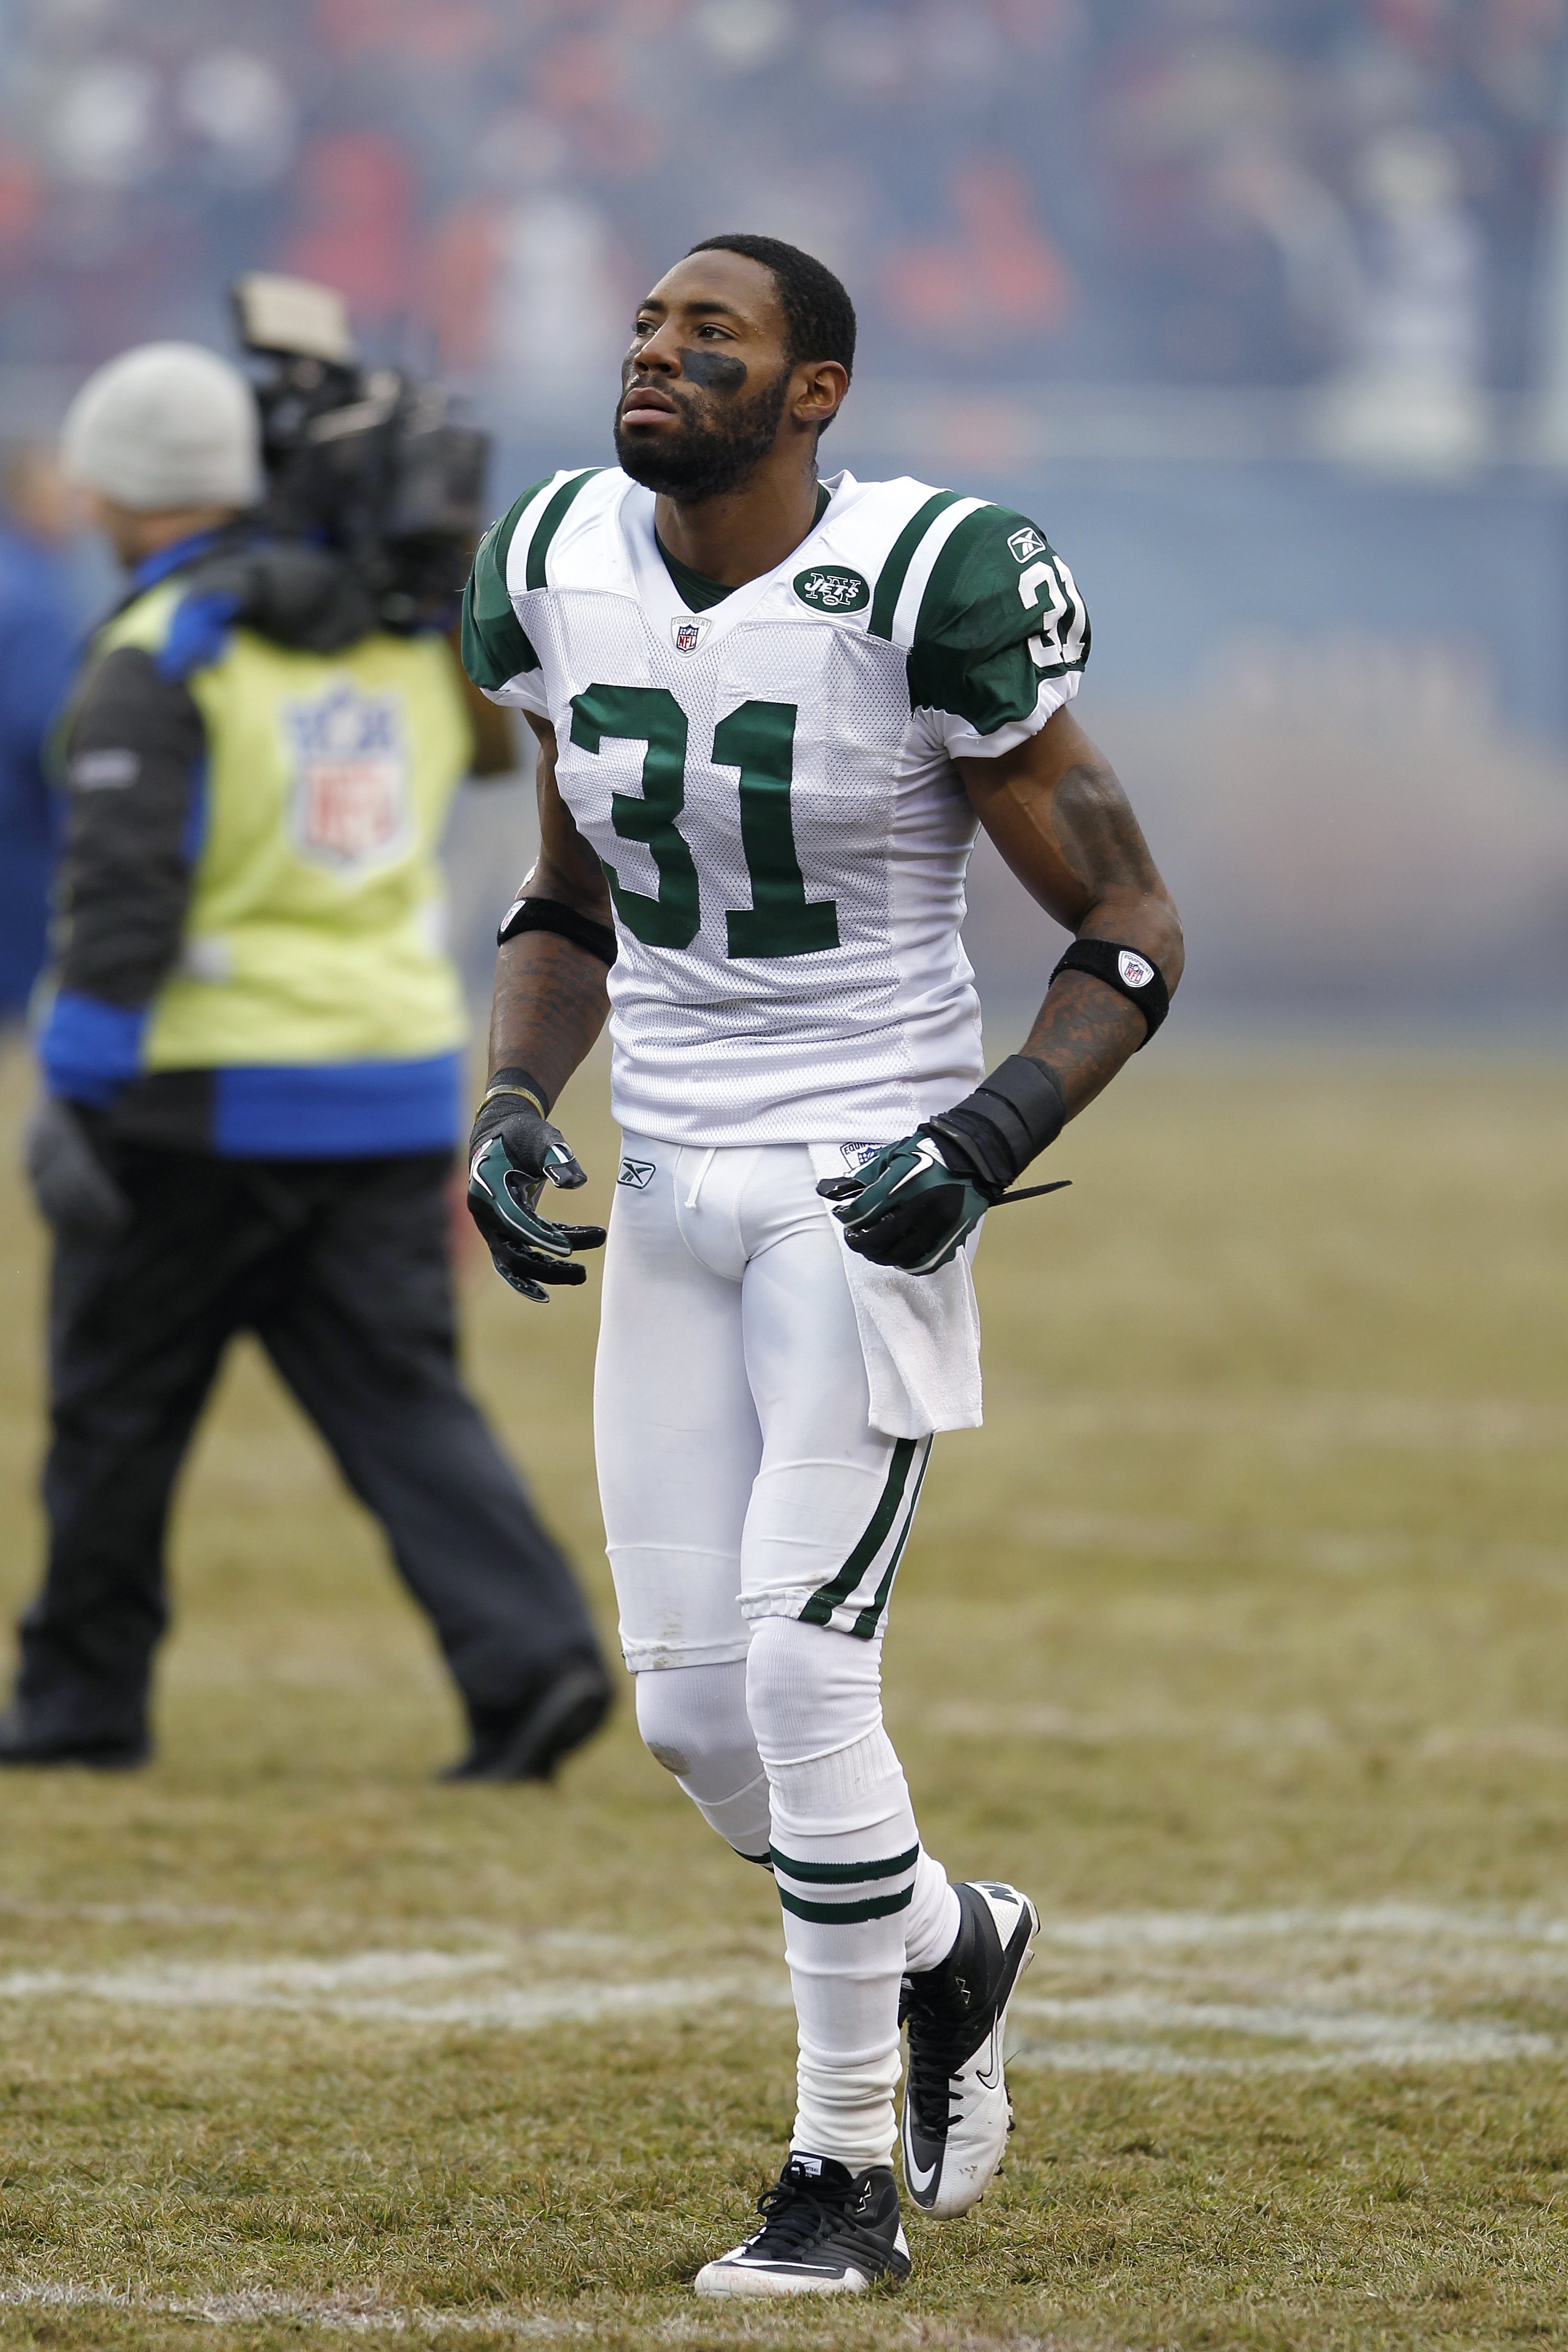 Antonio Cromartie #31 of the New York Jets looks on during the game against the Chicago Bears at Soldier Field on December 26, 2010 | Photo: Getty Images